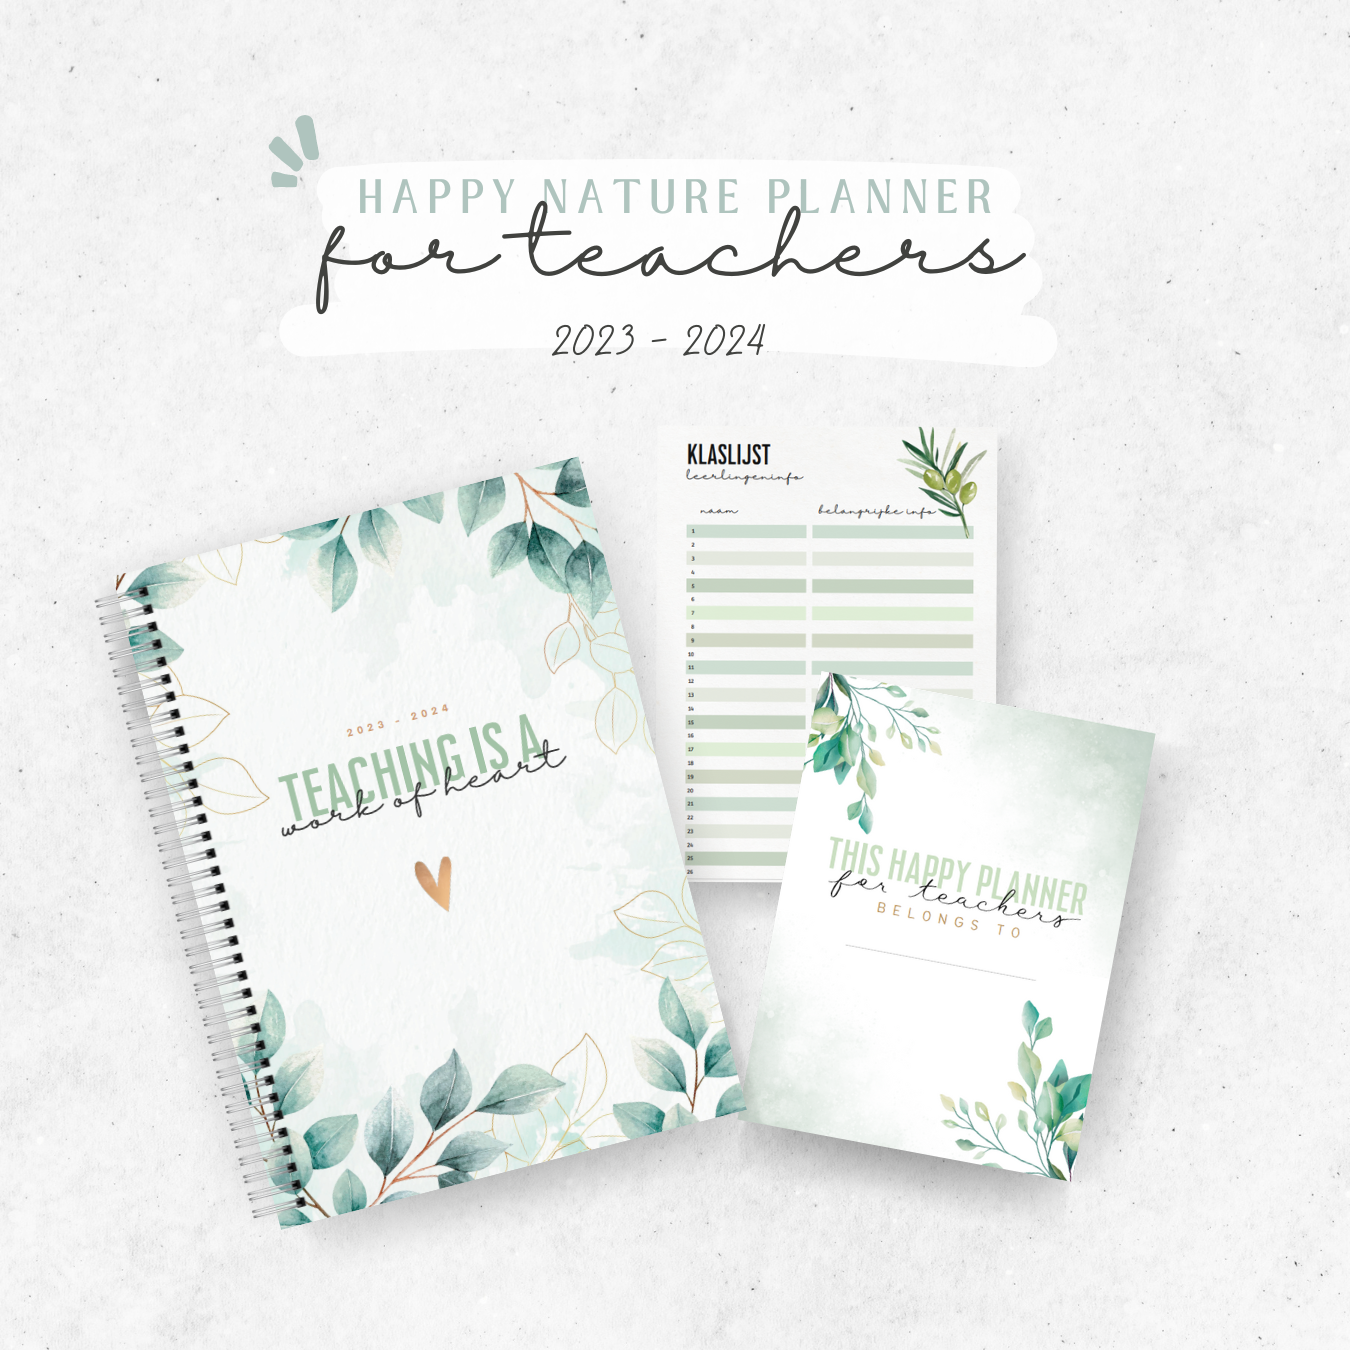 Happy Planner for teachers – Nature